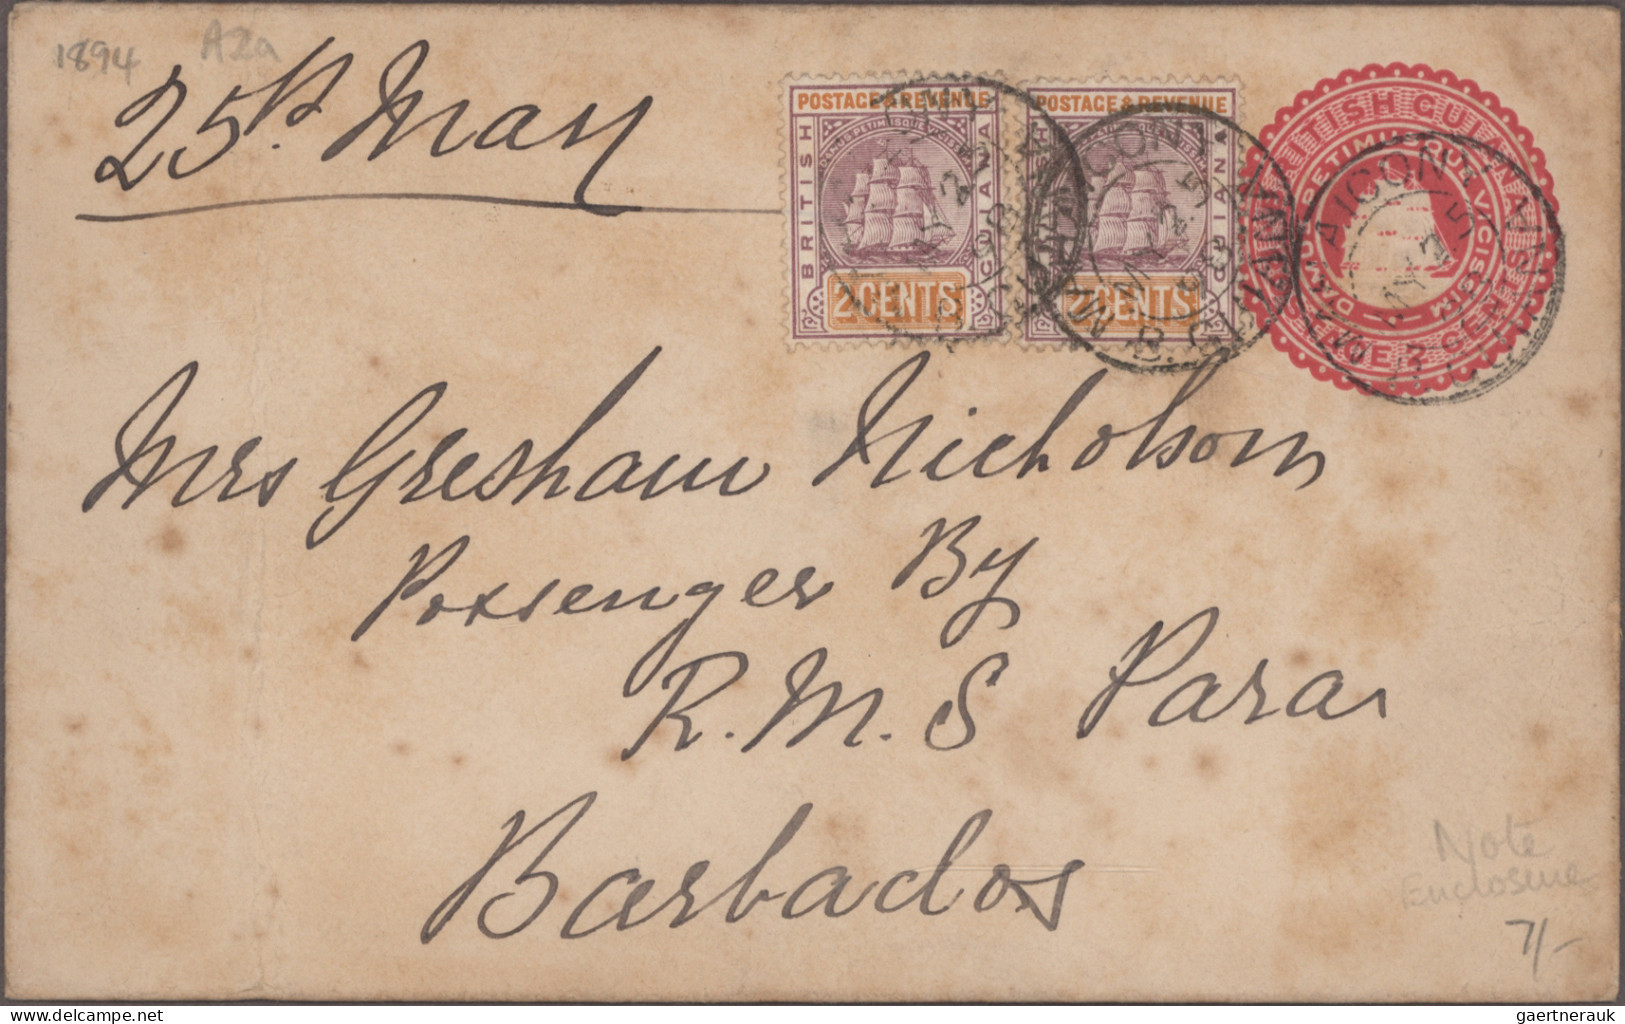 British Guiana - postal stationery: 1879/1923 Collection of about 120 postal sta